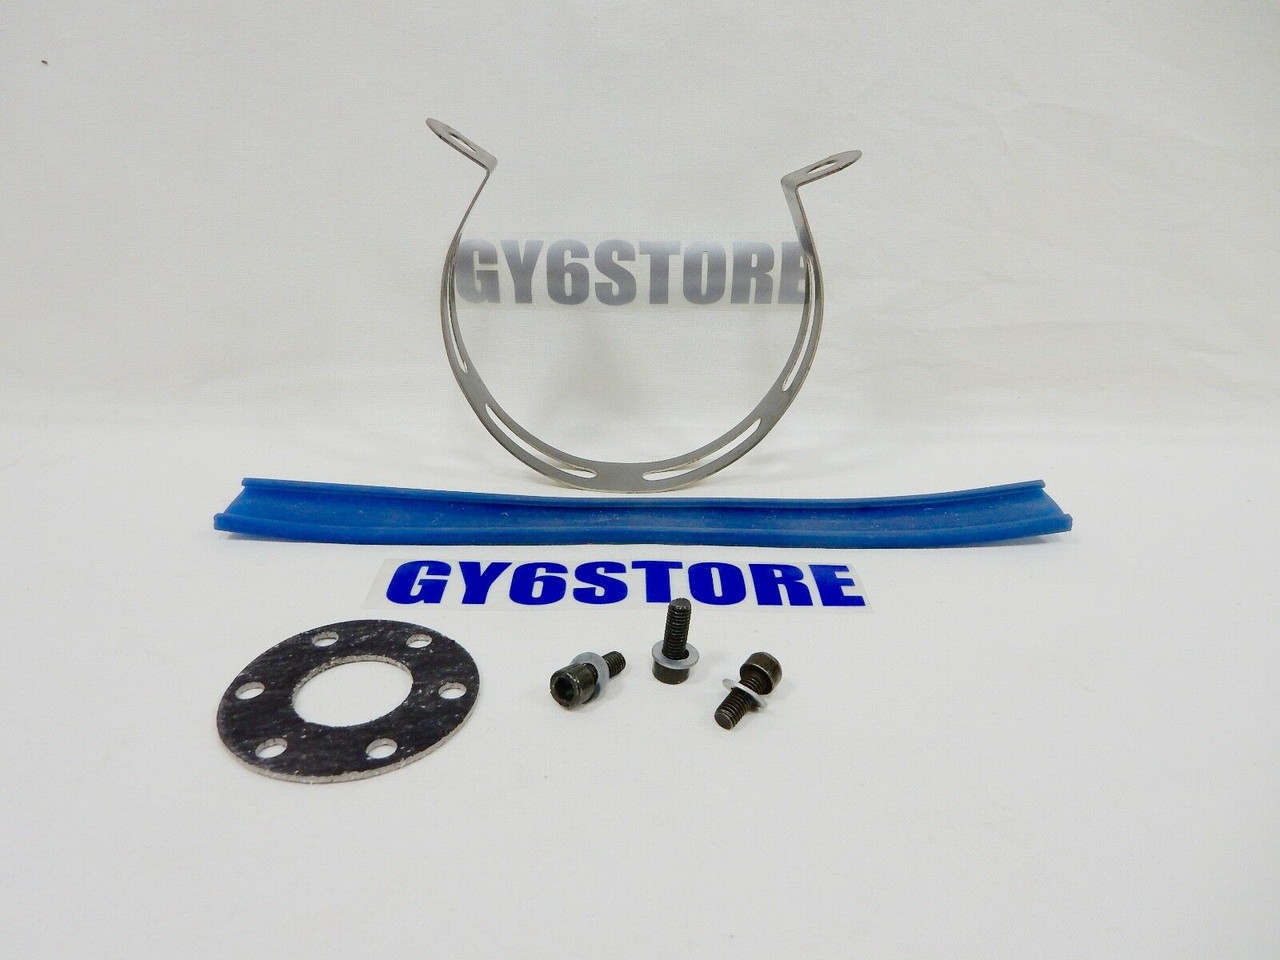 MUFFLER CLAMP / HANGER FOR 88mm / 300mm SCOOTER MUFFLER COMES WITH HARDWARE